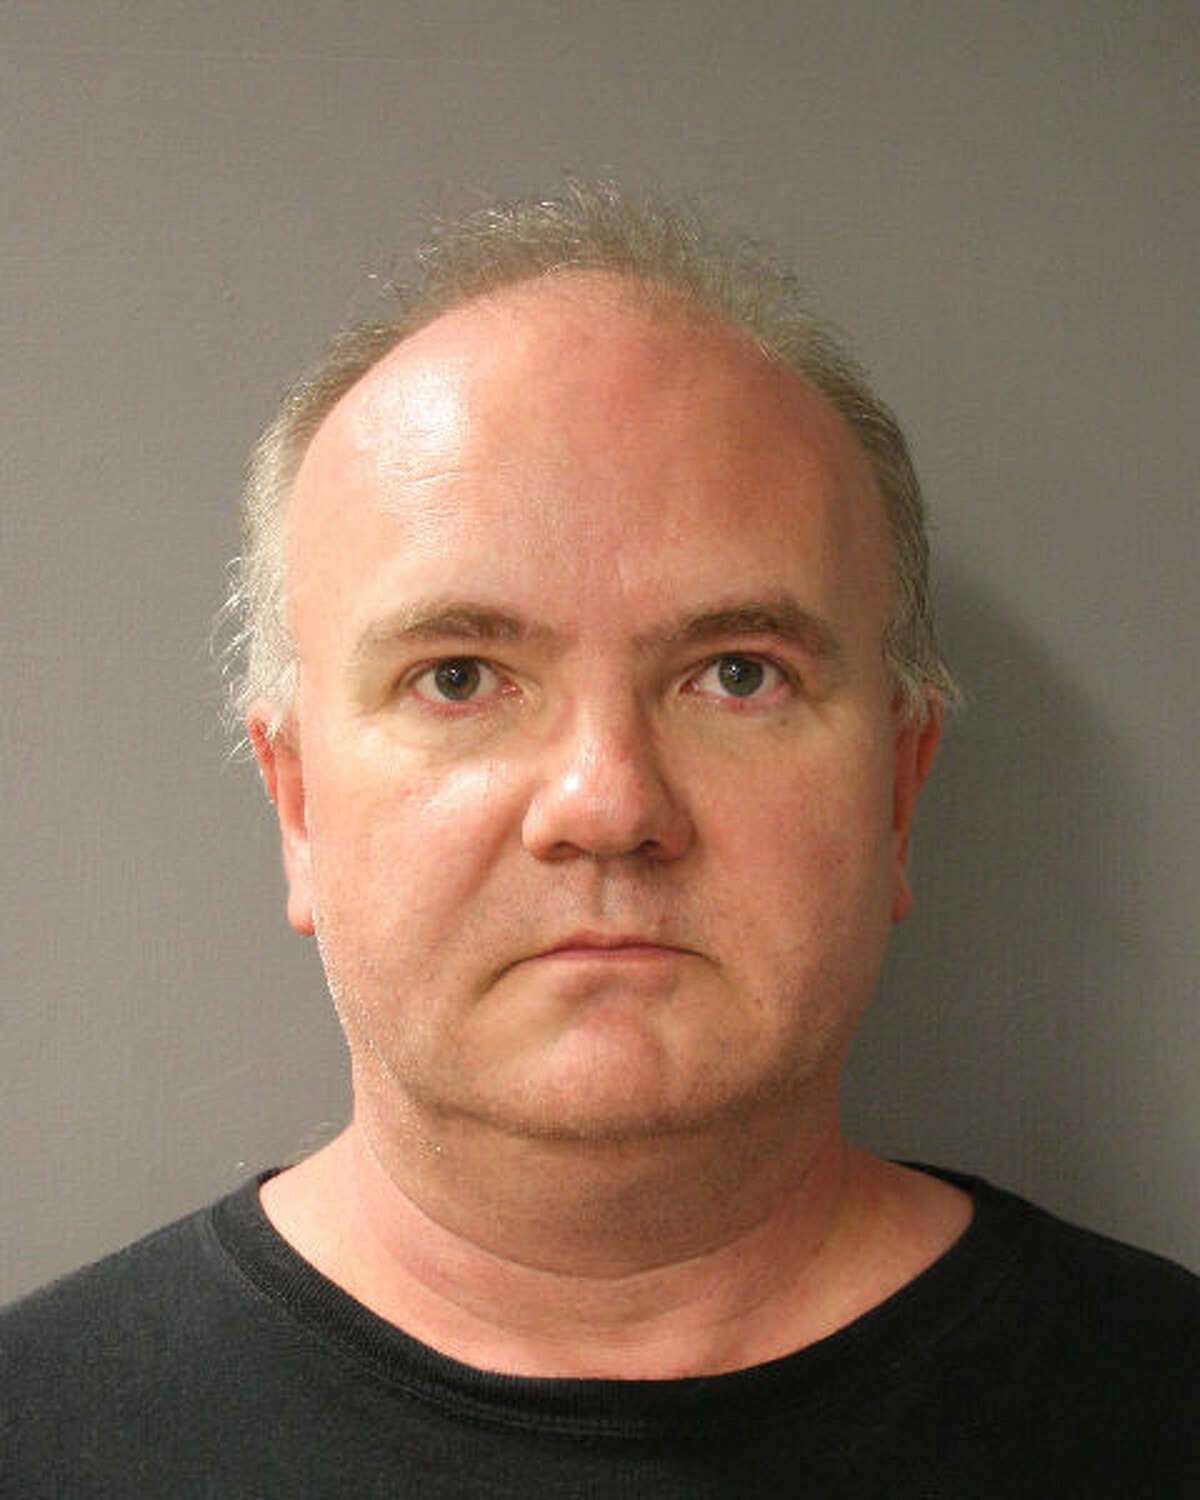 Piano teacher Dariusz Pawlas, 50, is charged with fondling a young girl in Houston. (HPD booking photo)